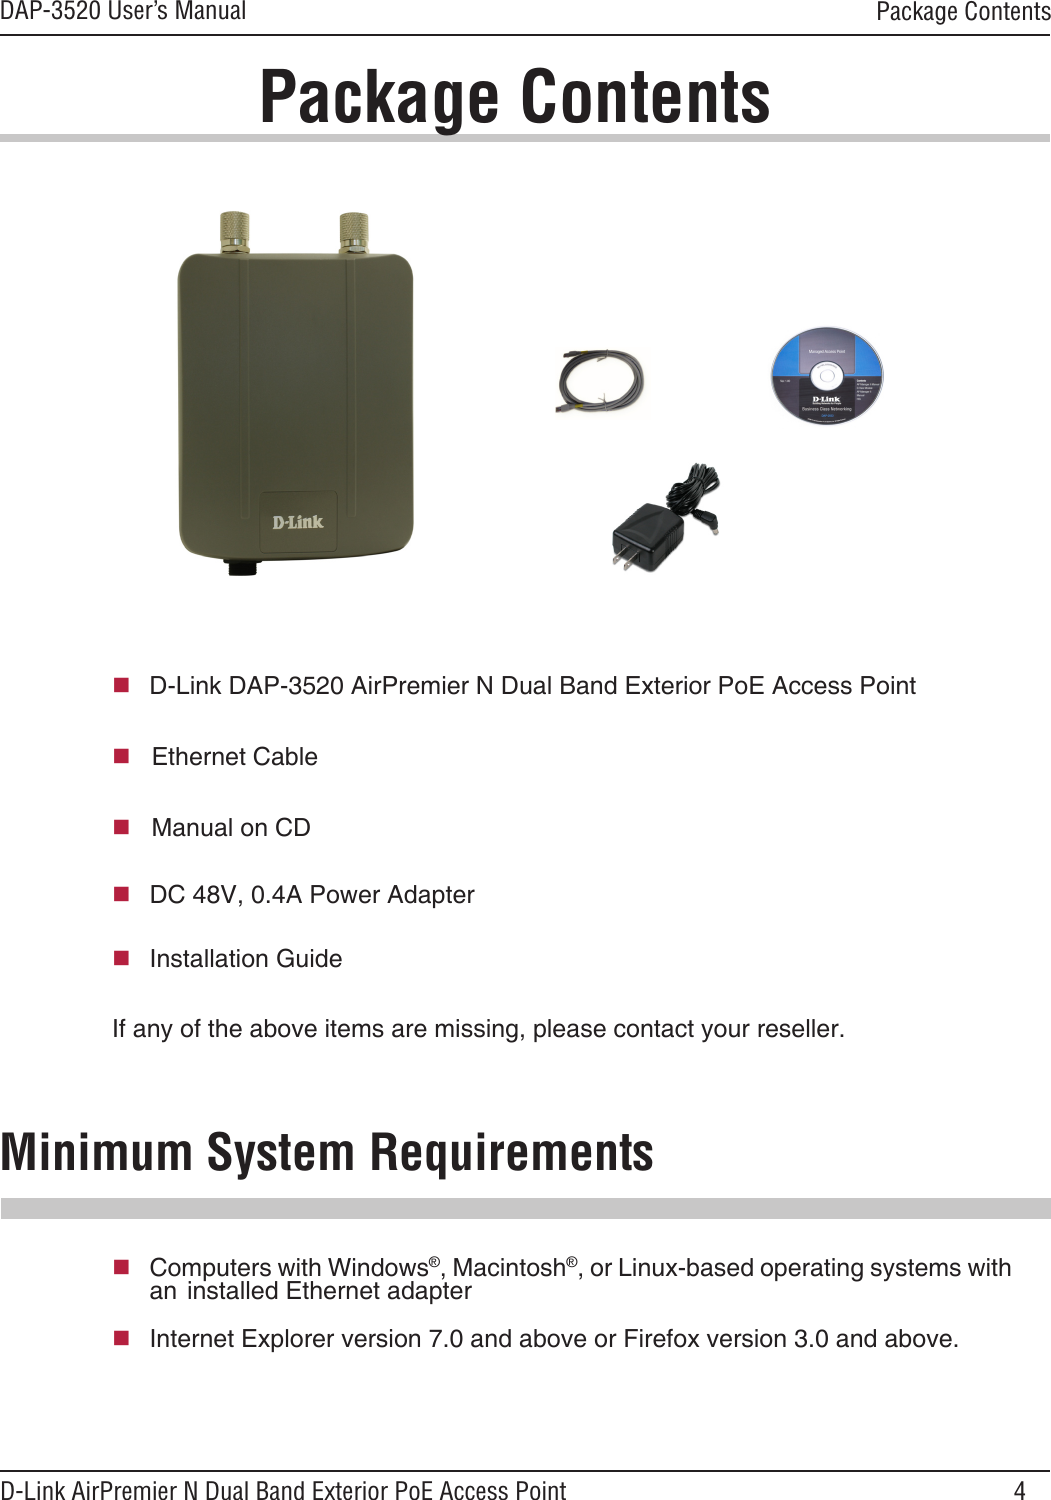 4DAP-3520 User’s ManualD-Link AirPremier N Dual Band Exterior PoE Access Point  D-Link DAP-3520 AirPremier N Dual Band Exterior PoE Access Point     Ethernet Cable   Manual on CDPackage ContentsMinimum System Requirements If any of the above items are missing, please contact your reseller.Computers with Windows®, Macintosh®, or Linux-based operating systems with an  installed Ethernet adapterInternet Explorer version 7.0 and above or Firefox version 3.0 and above.Package Contents  DC 48V, 0.4A Power Adapter  Installation Guide